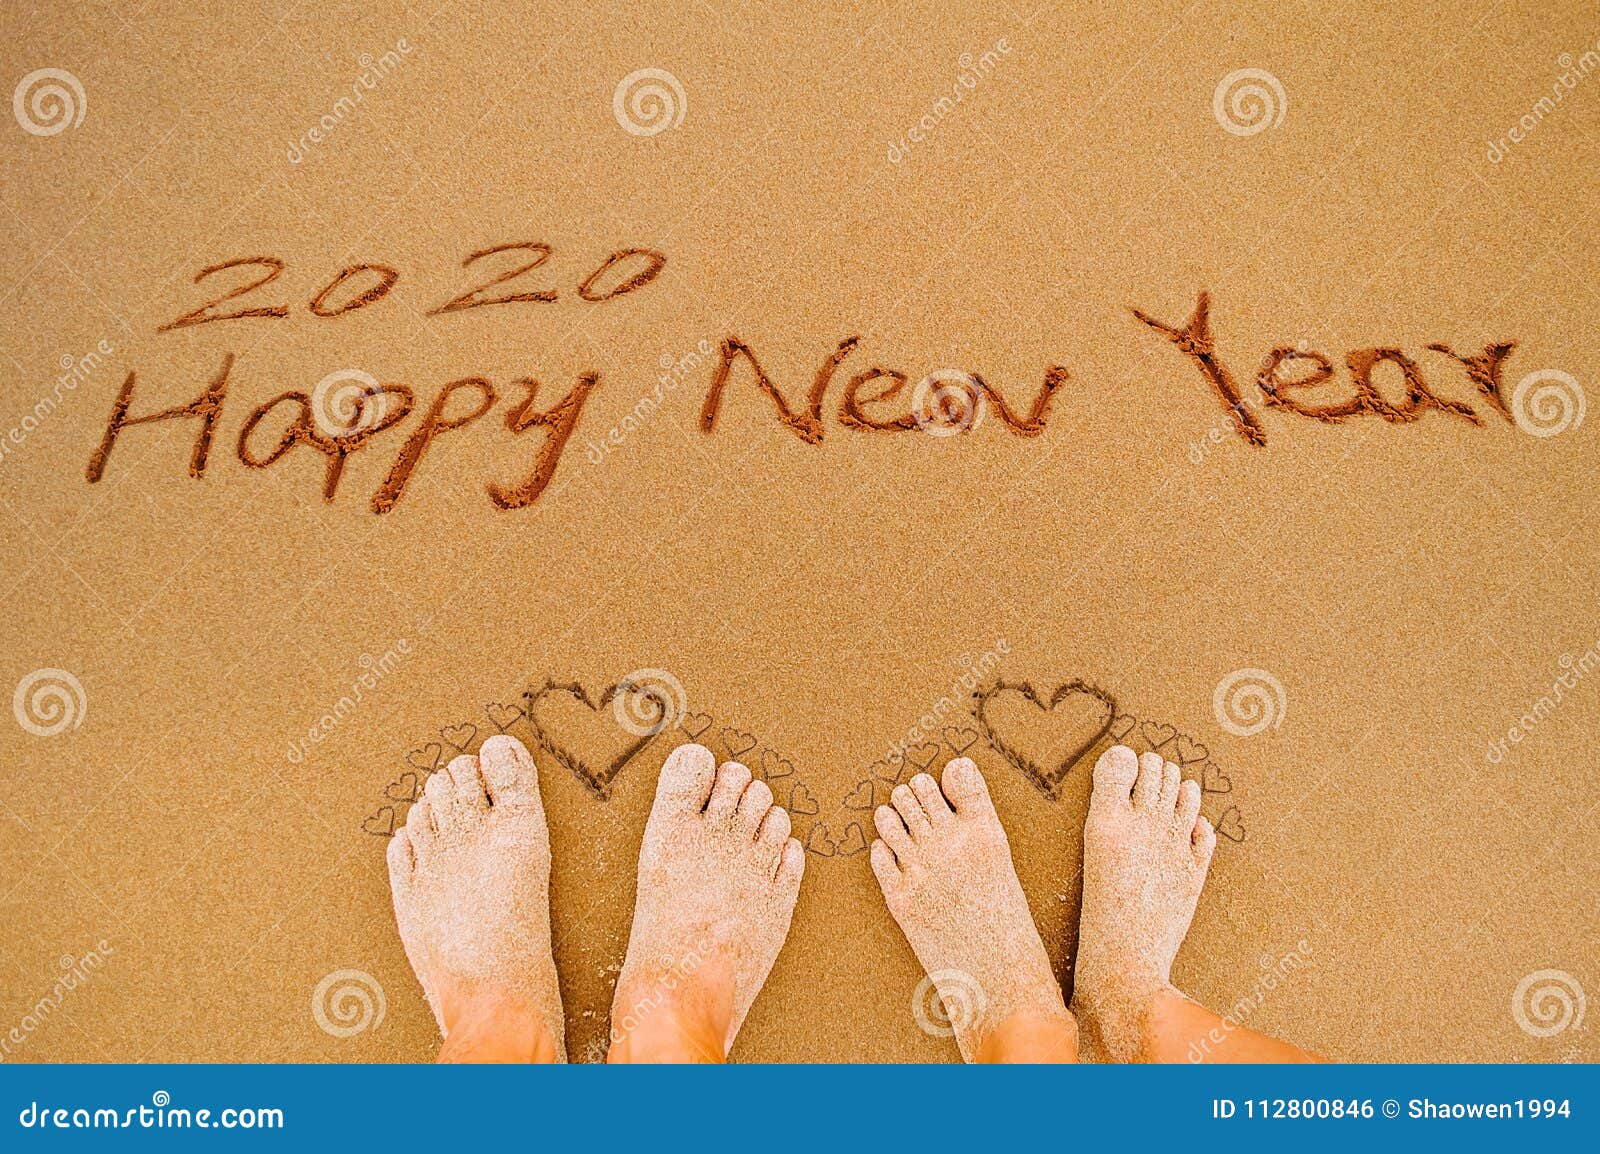 2020 Happy New Year with Love Heart Stock Photo - Image of ocean ...